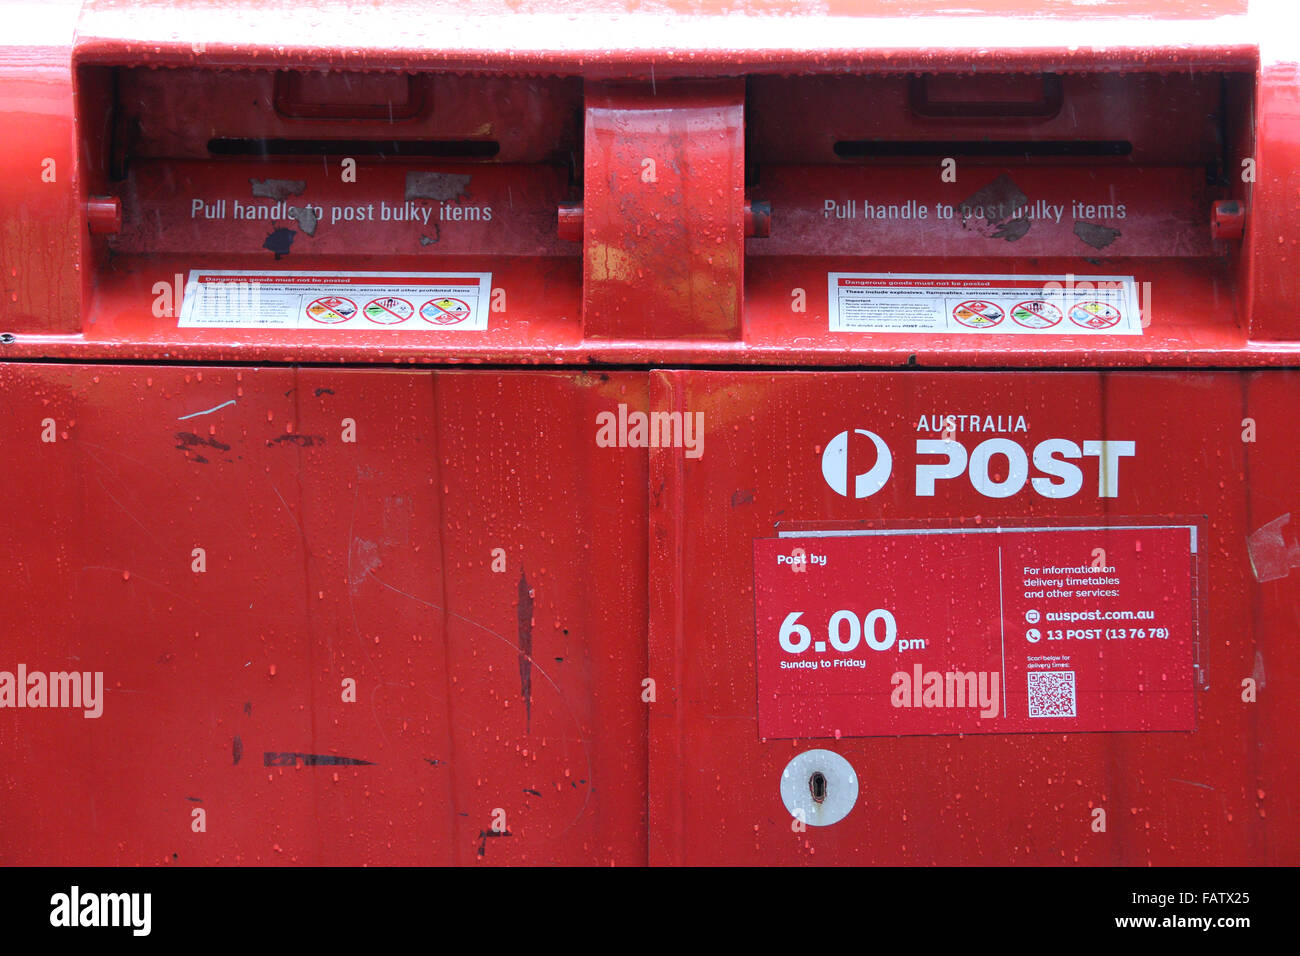 Sydney, Australia. 5 January 2016. Australia Post has received complaints for increasing the price of a stamp for regular mail from 70c to $1 as well as introducing slower delivery times. Pictured: Post boxes on Margaret Street. Credit: Richard Milnes/Alamy Live News Stock Photo